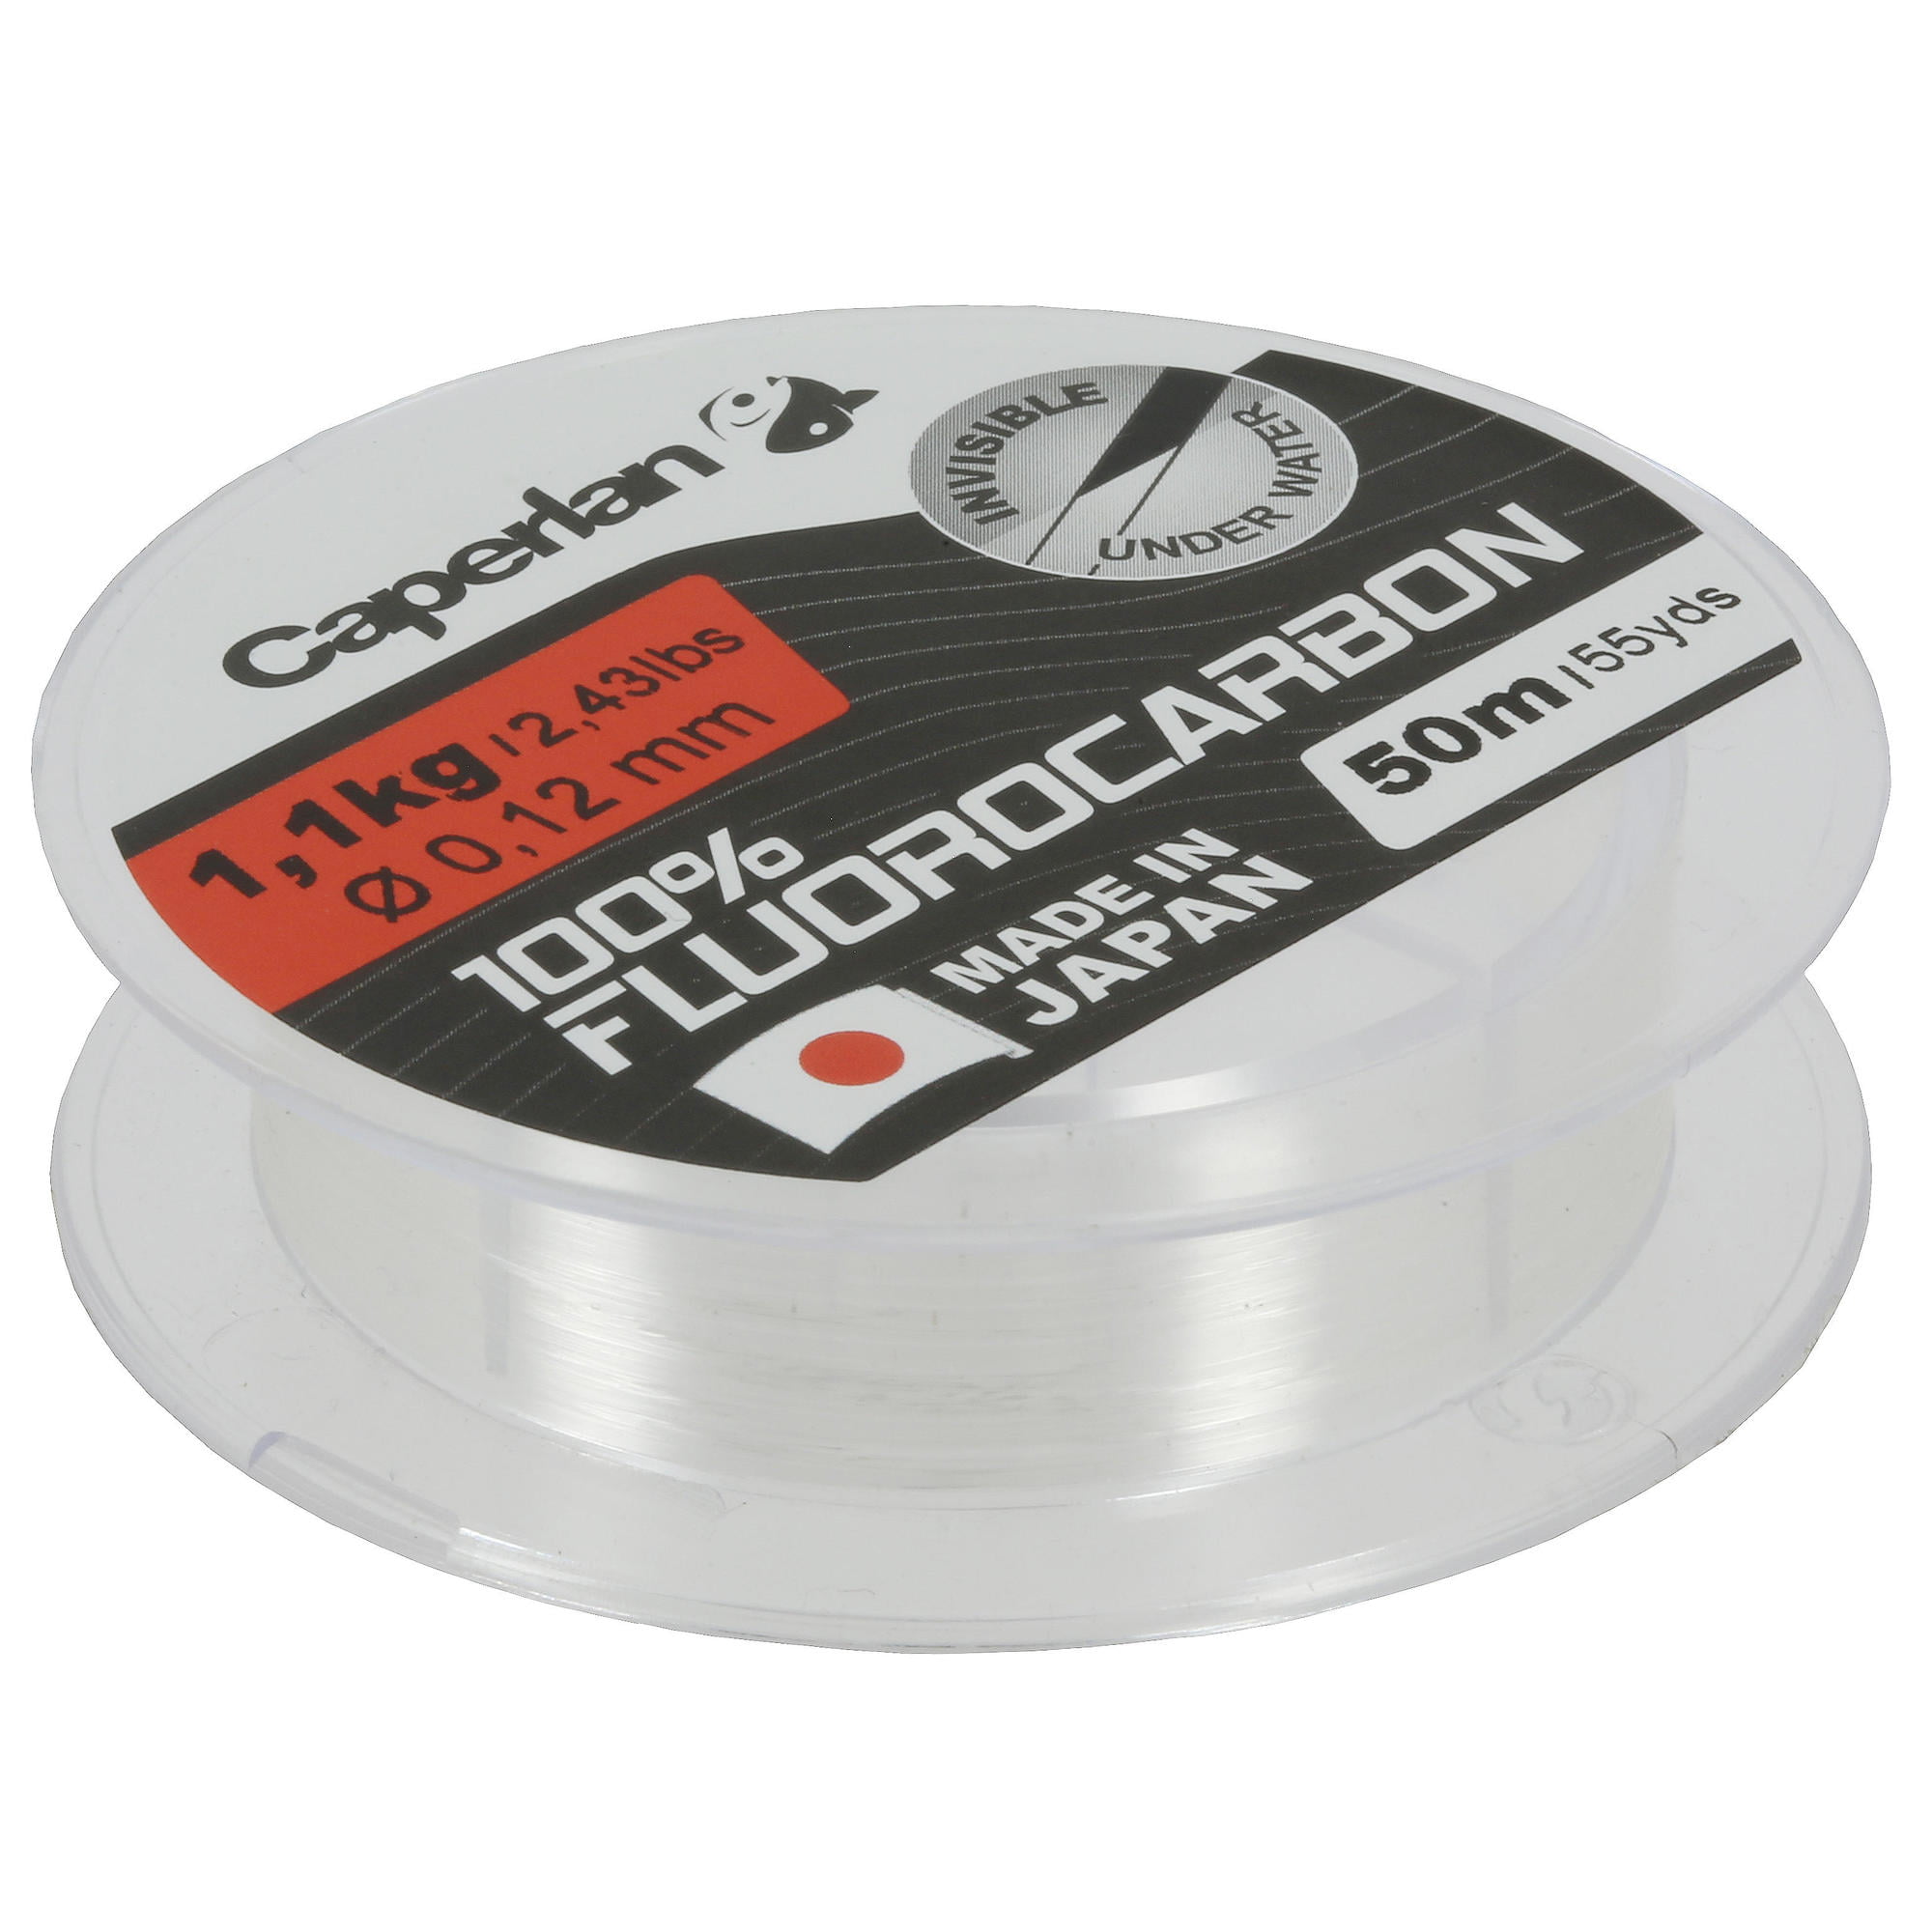 60lb Test 25yds Tsunami Pro Crystal Clear Fishing Line-100% Fluorcarbon Leader 